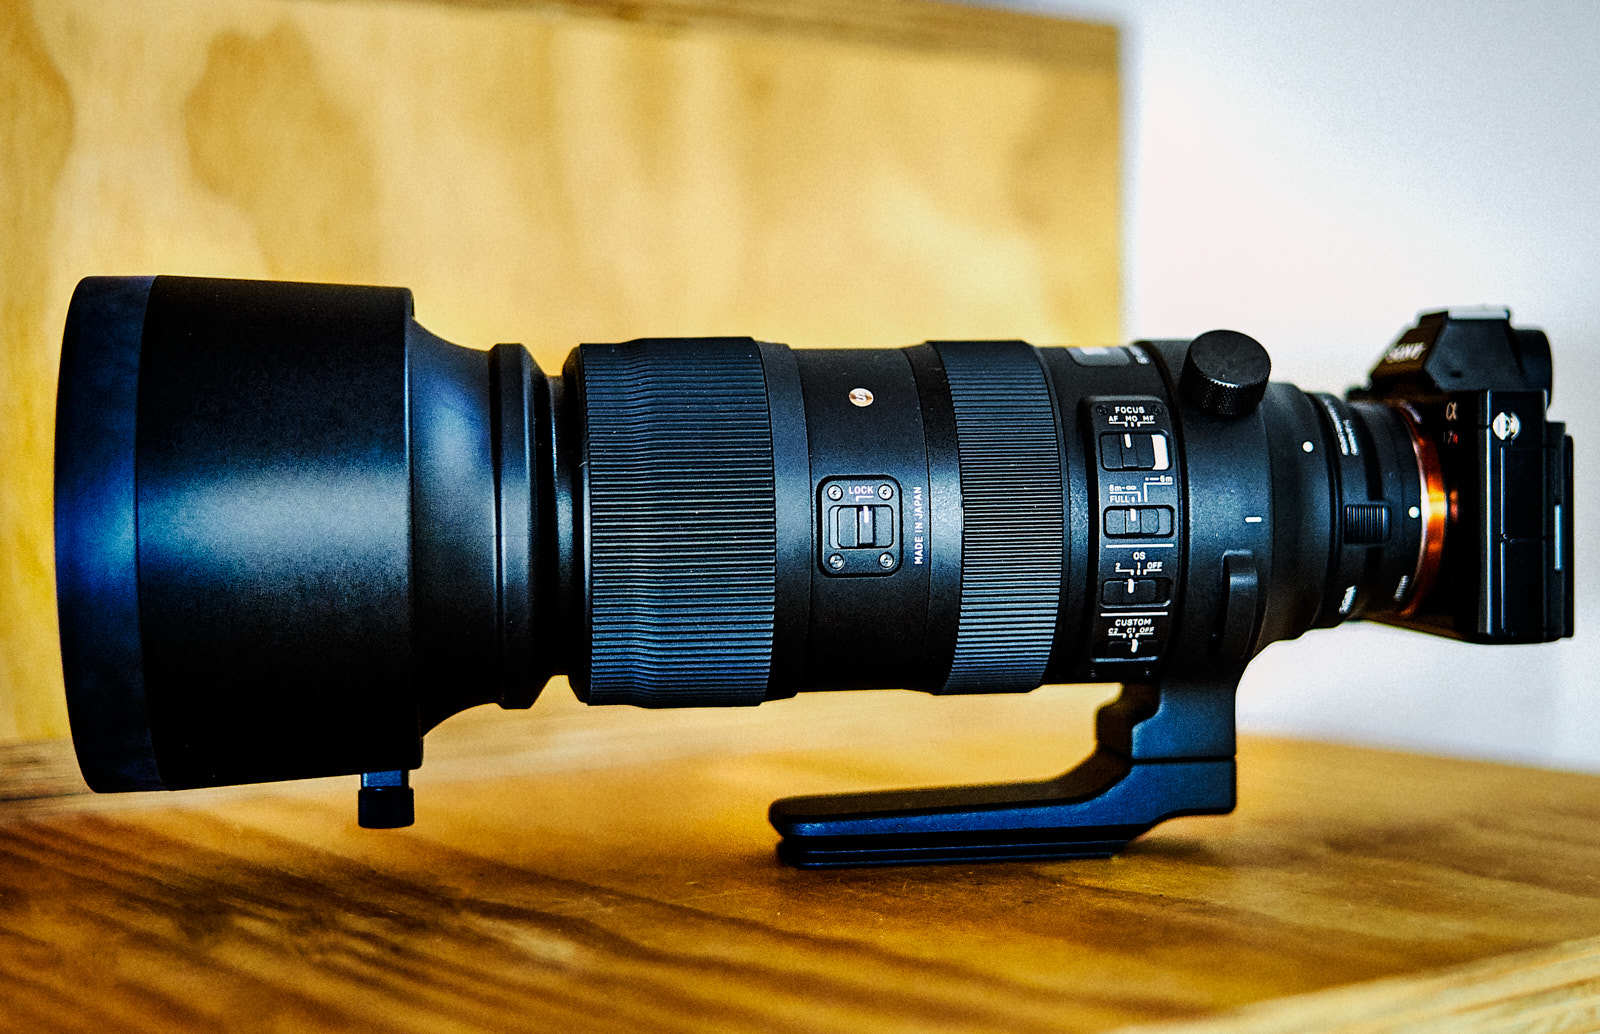 SIGMA 60-600mm: a Range for Almost Anything